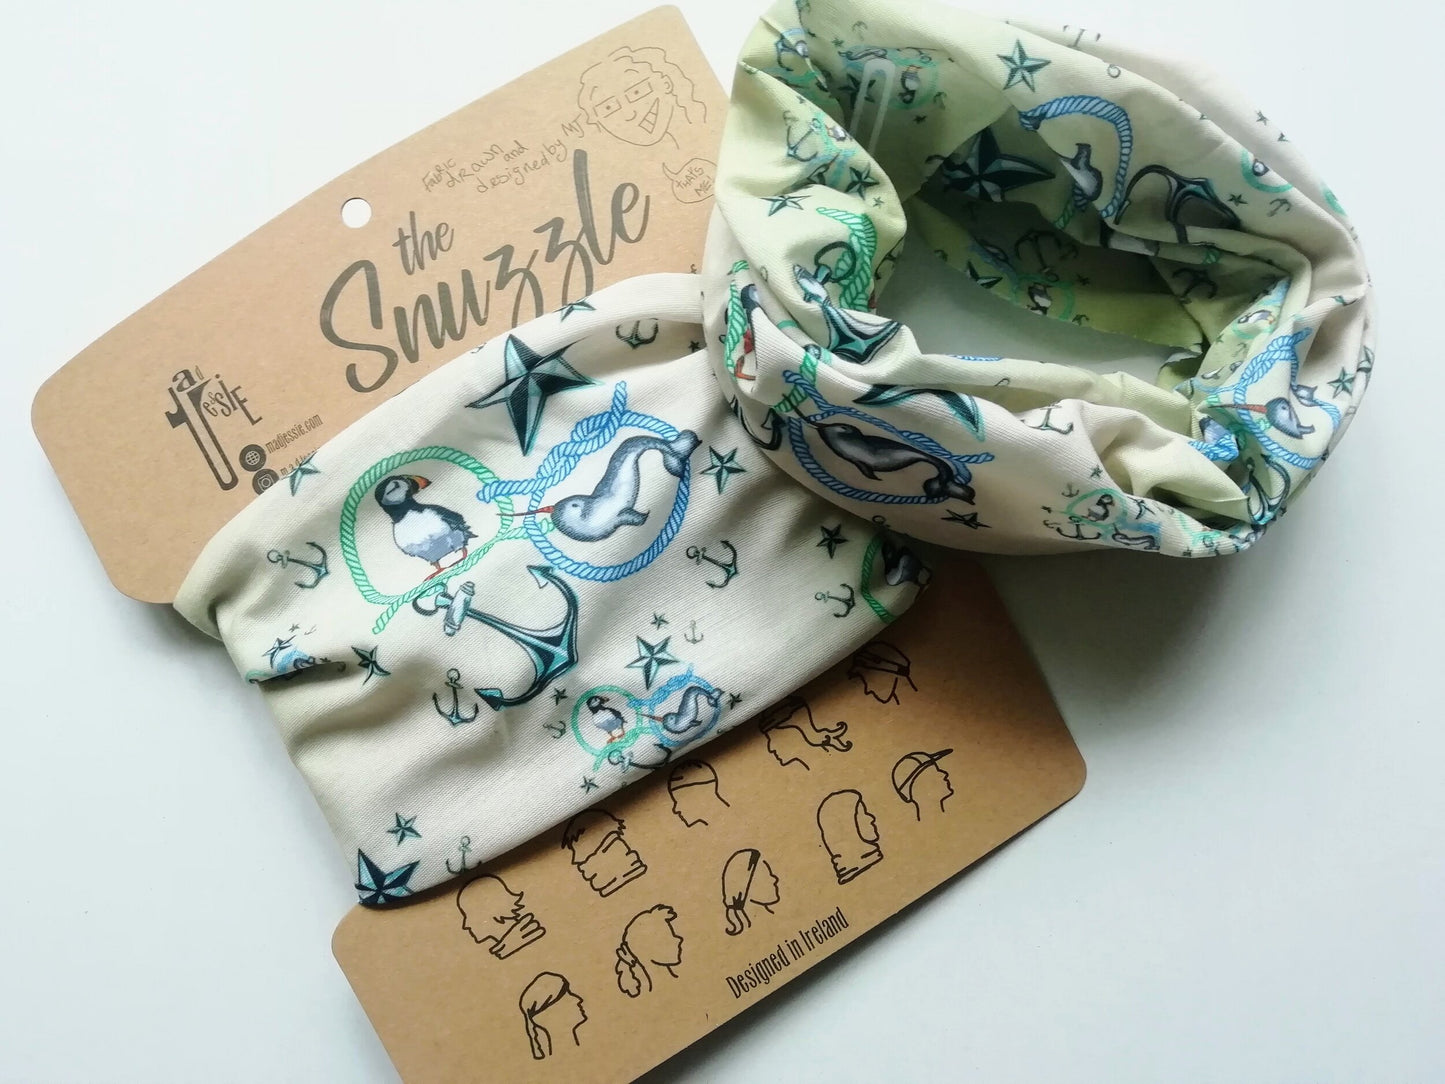 Snuzzle - Puffins &amp; Narwals (Nautical Snuzzle)